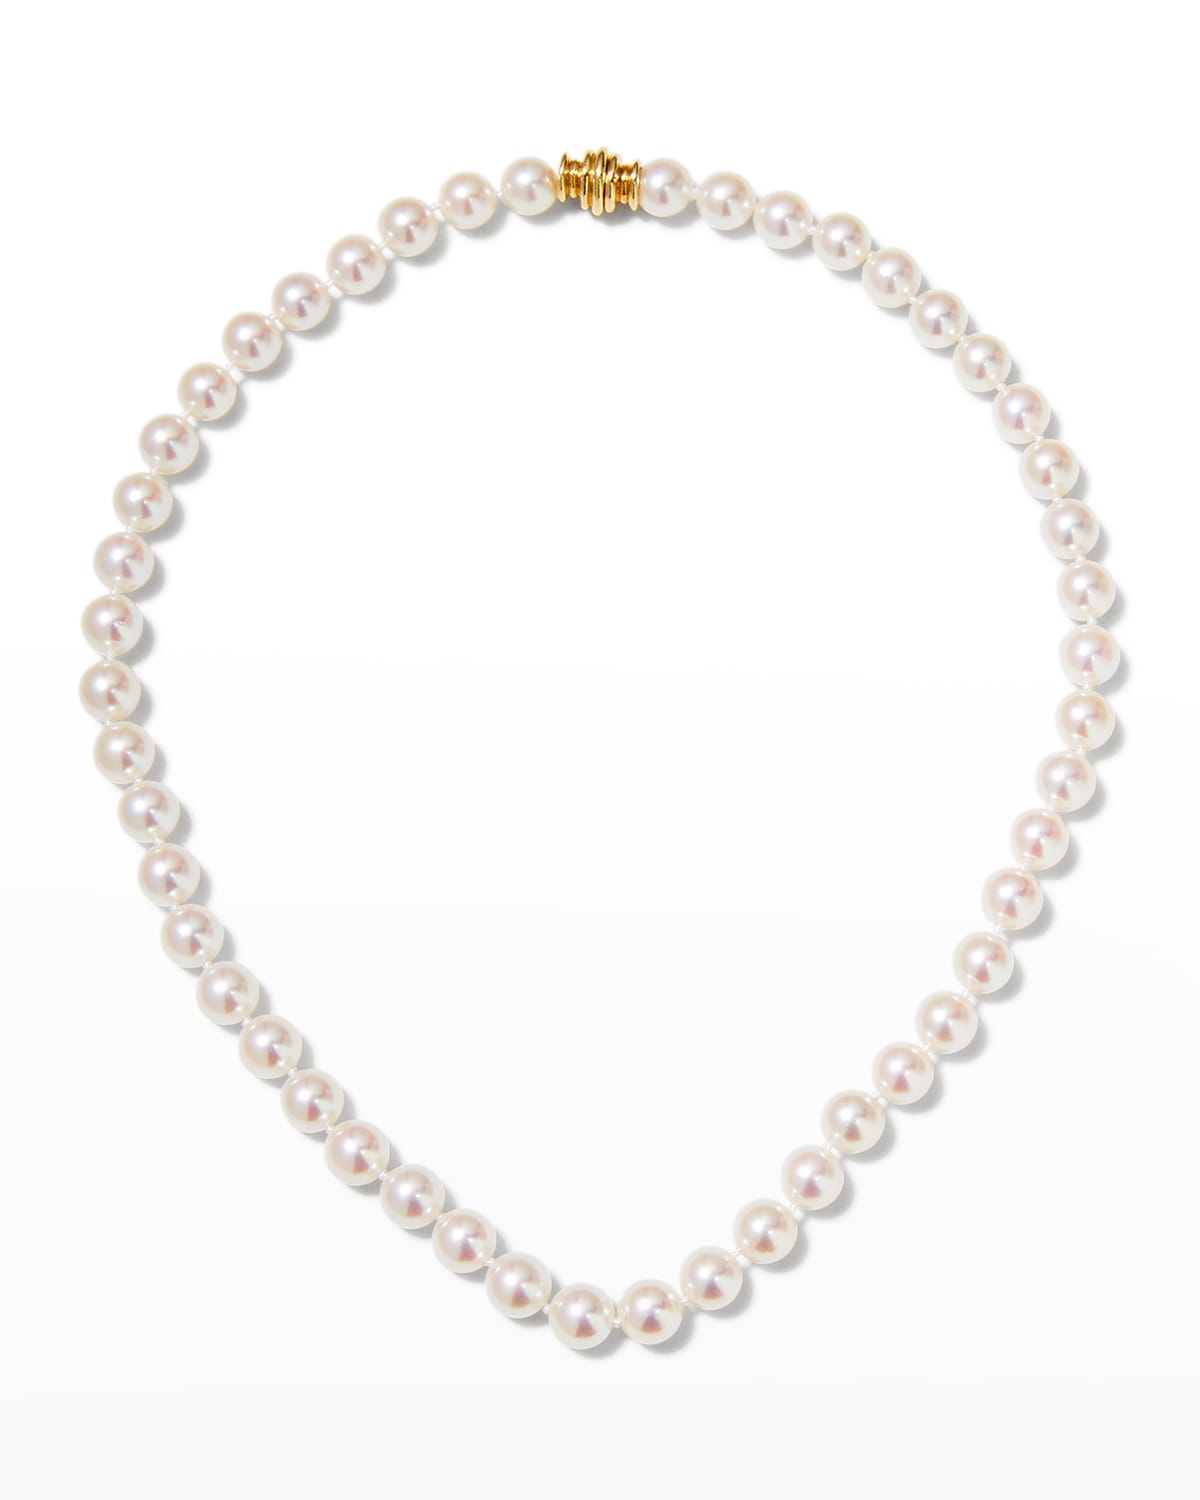 Assael 16" Akoya Cultured 8mm Pearl Necklace with Yellow Gold Clasp